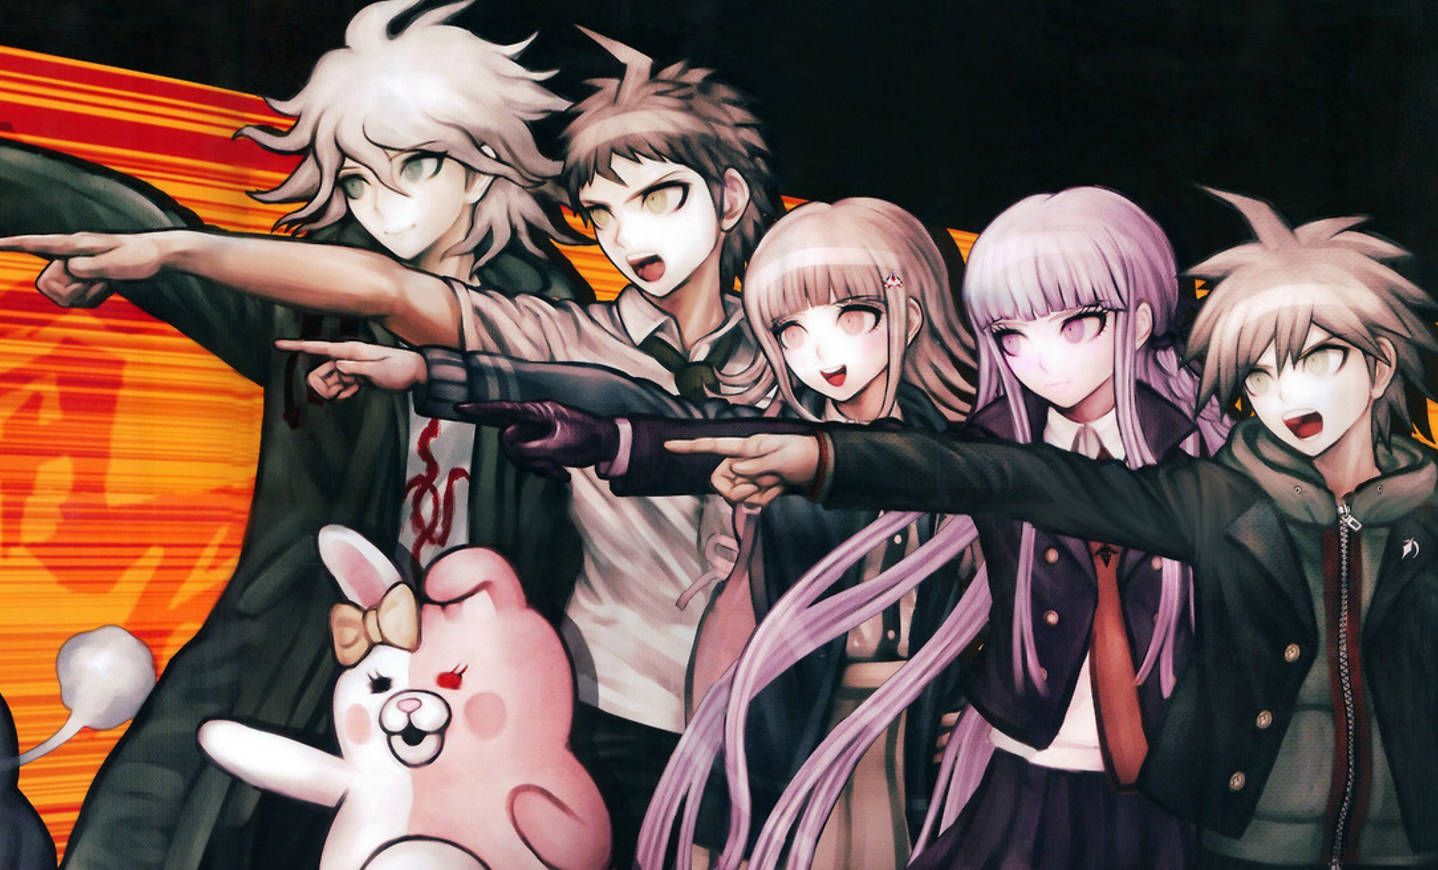 A group of anime characters pointing at something - Danganronpa